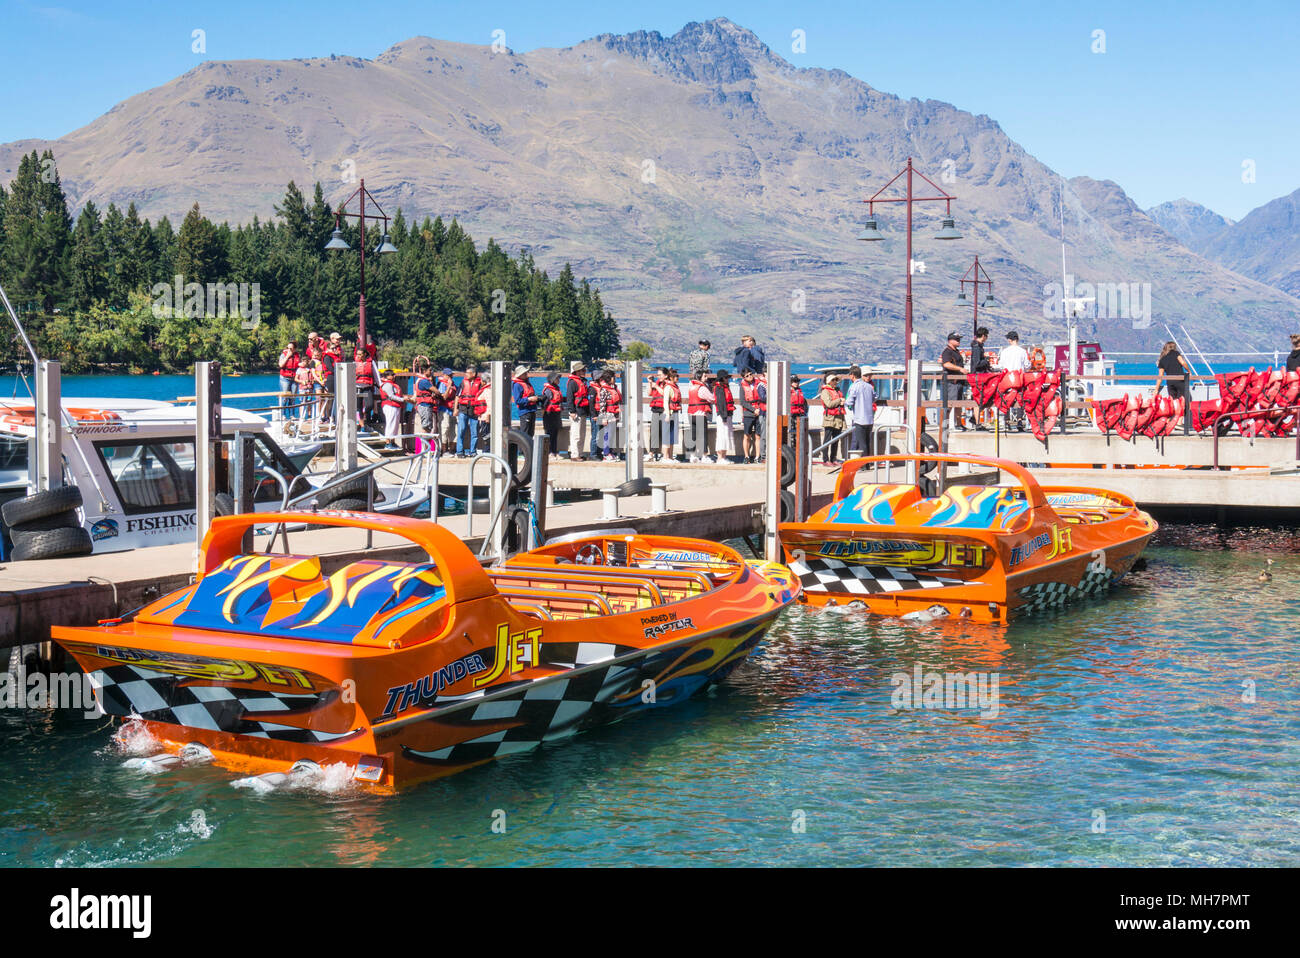 Queenstown South Island new zealand  toursists queueing for a thrilling jet boat ride on Lake wakatipu Queenstown south island new zealand nz Stock Photo